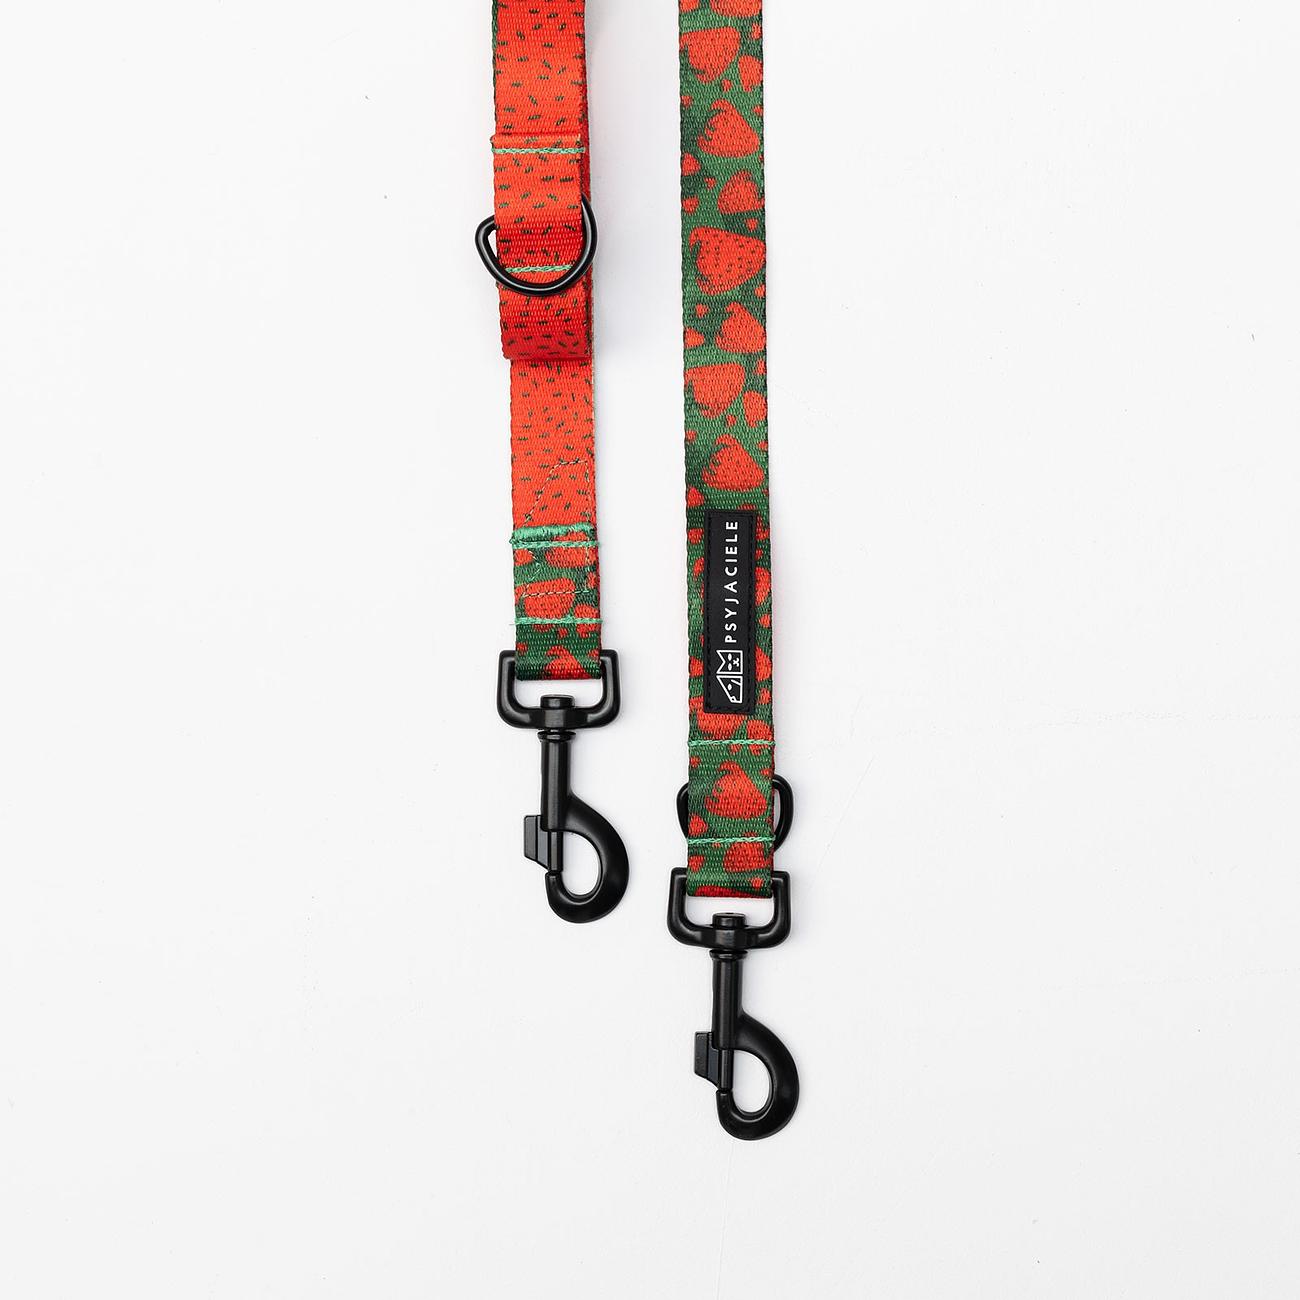 "Strawberry Fields Forever" leash